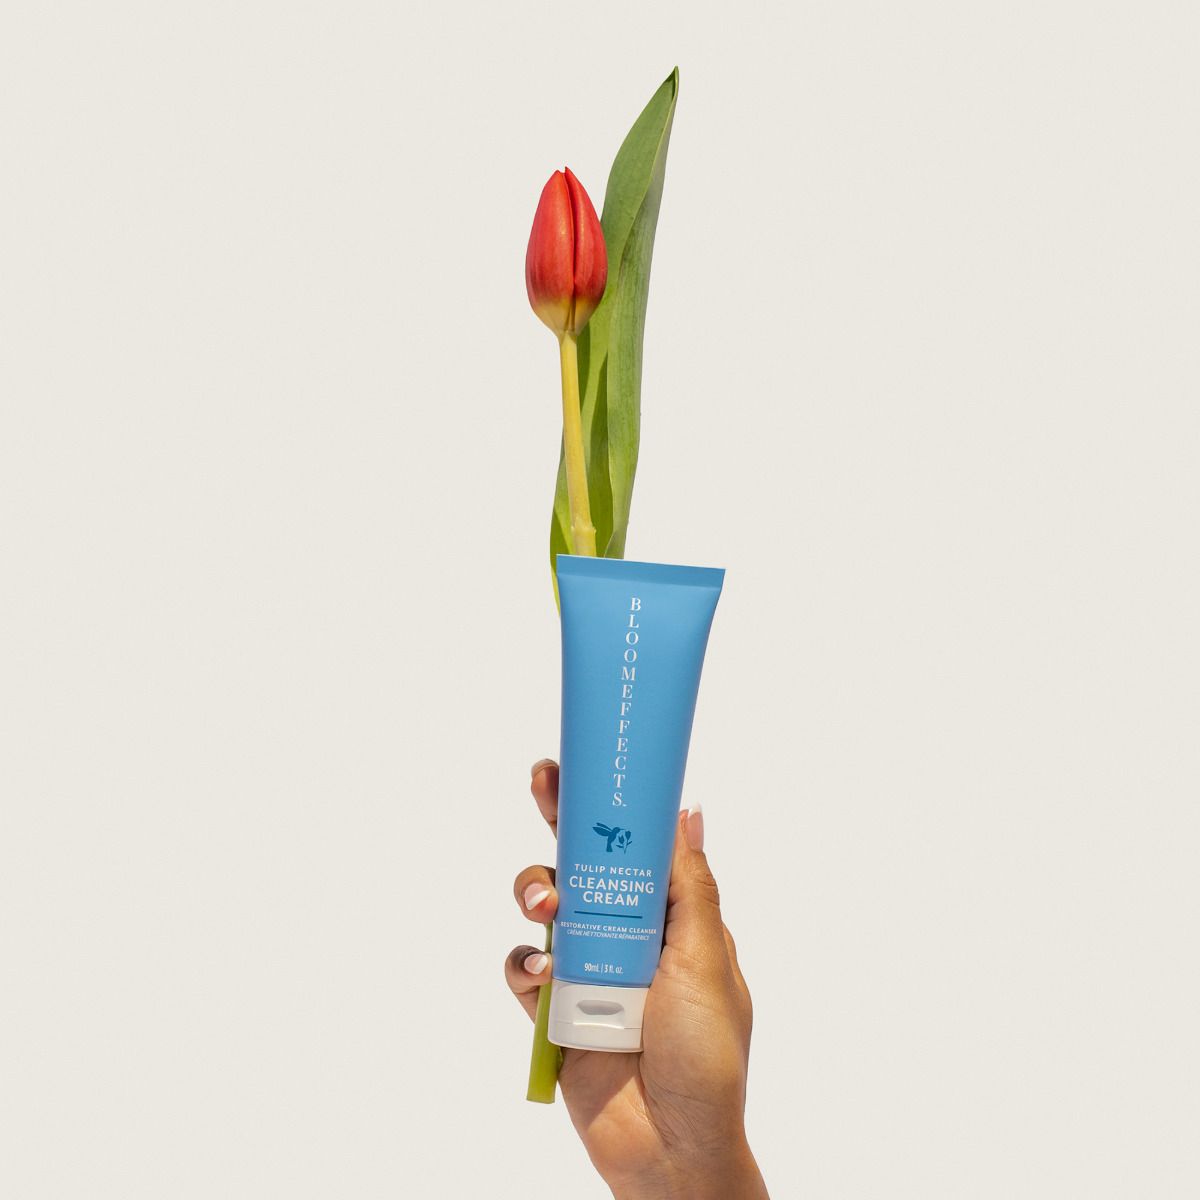 Bloomeffects Tulip Nectar Cleansing Cream 3.0oz